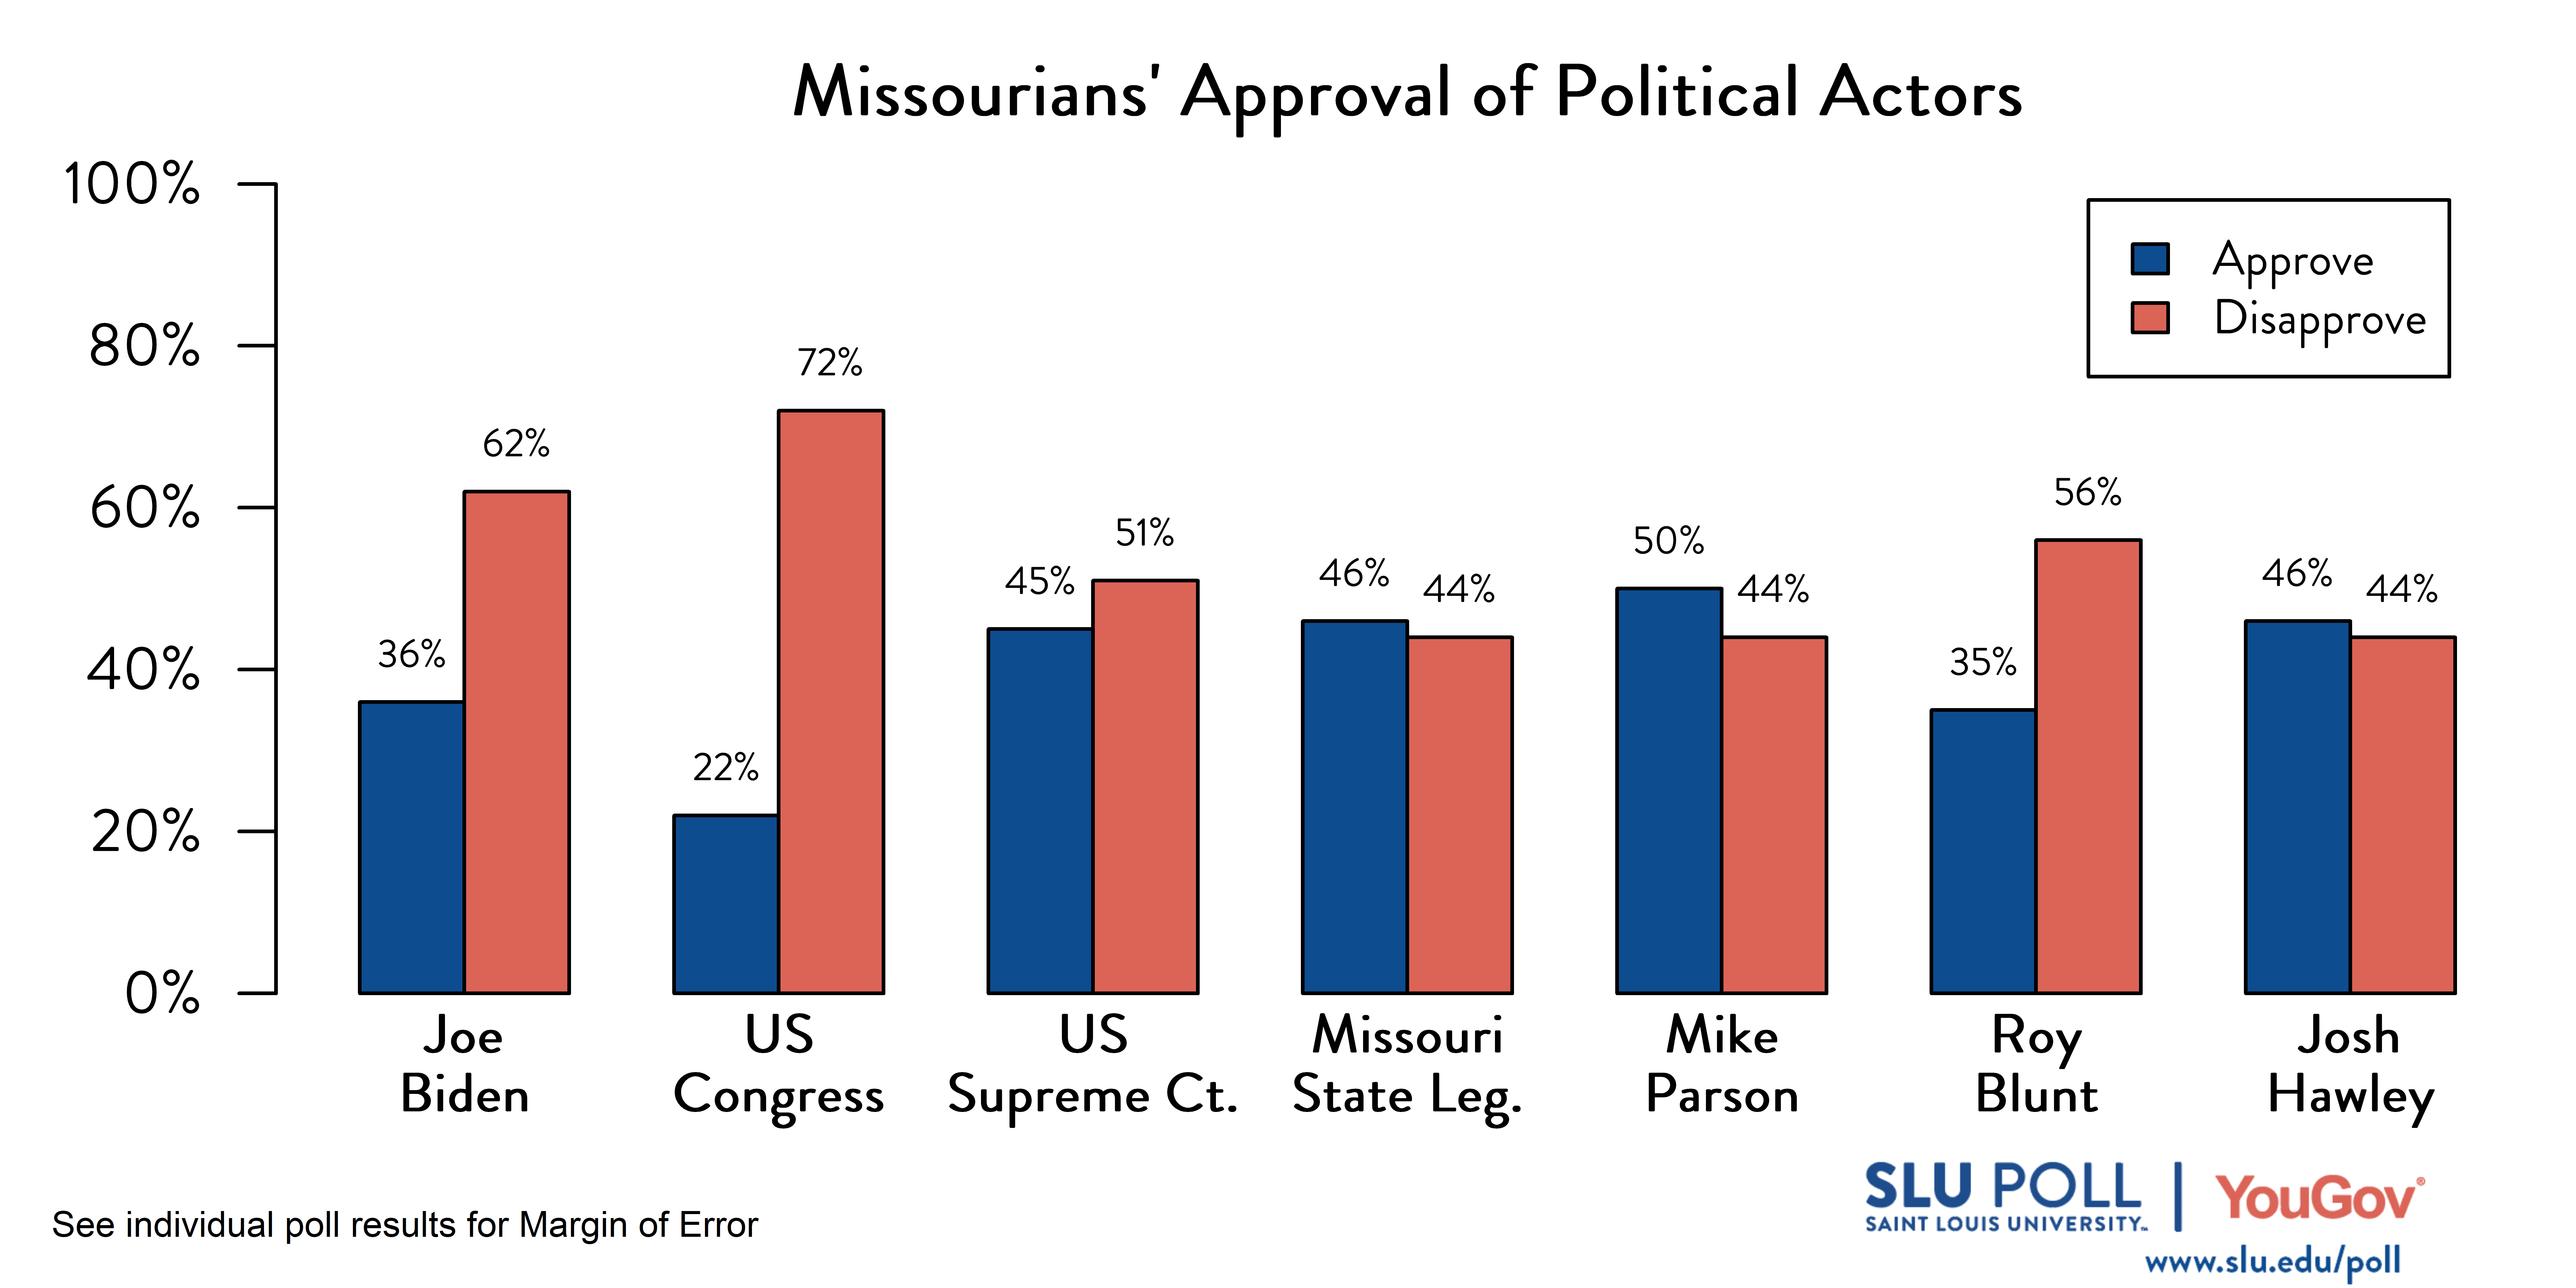 This graph shows respondents' approval and disapproval of various political actors. 36% approve of Joe Biden, while 62% disapprove. 22% disapprove of the US Congress, while 72% disapprove. 45% approve of the Supreme Court, while 51% disapprove. 46% approve of the Missouri State Legislature, while 44% disapprove. 50% approve of Mike Parson, while 44% disapprove. 35% approve of Roy Blunt, while 56% disapprove. 46% approve of Josh Hawley, while 44% disapprove. 